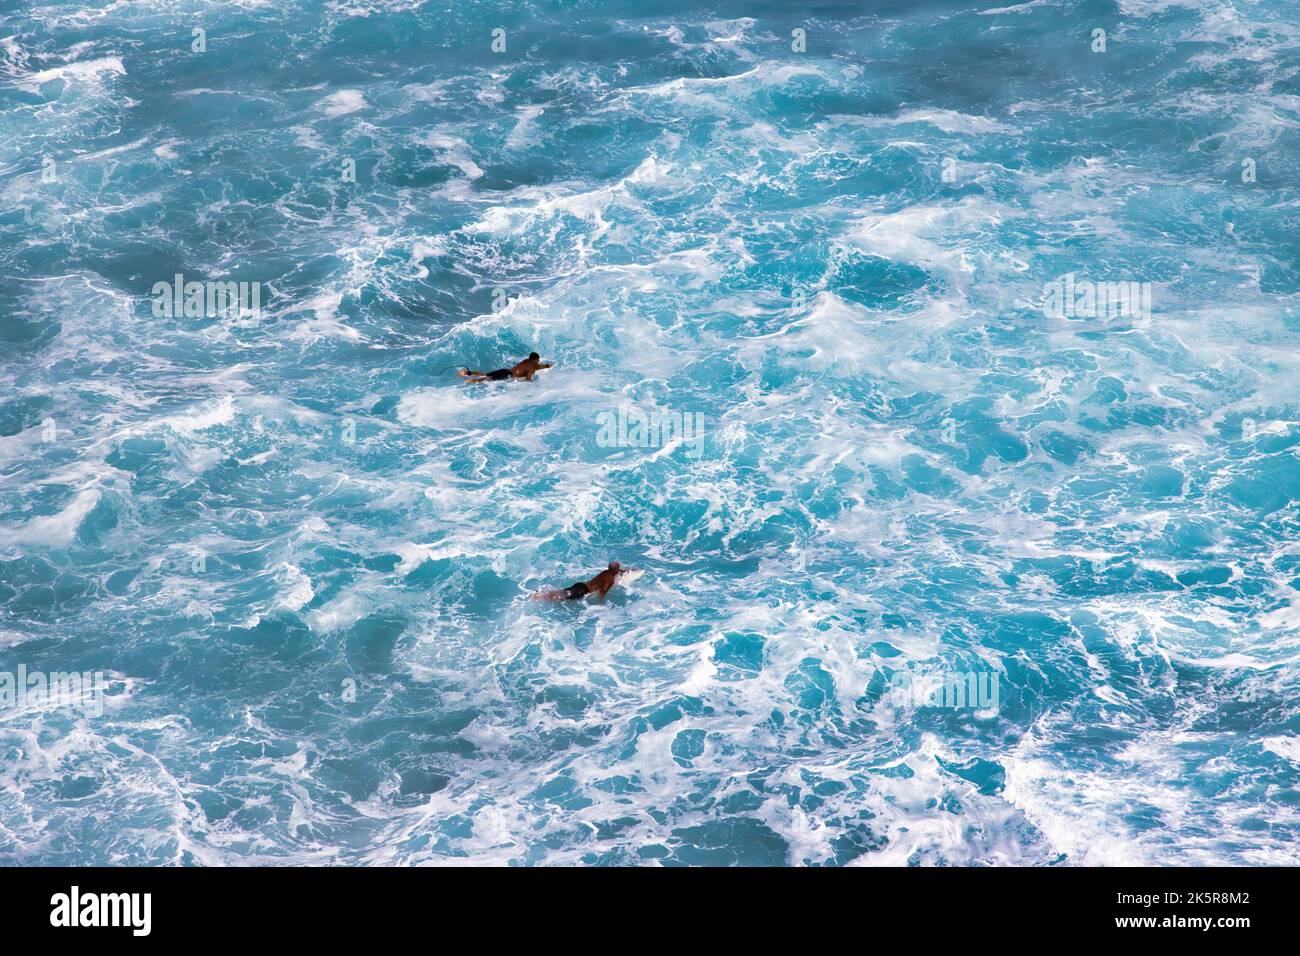 Two unidentifiable surfers coming back to shore after surfing. Stock Photo